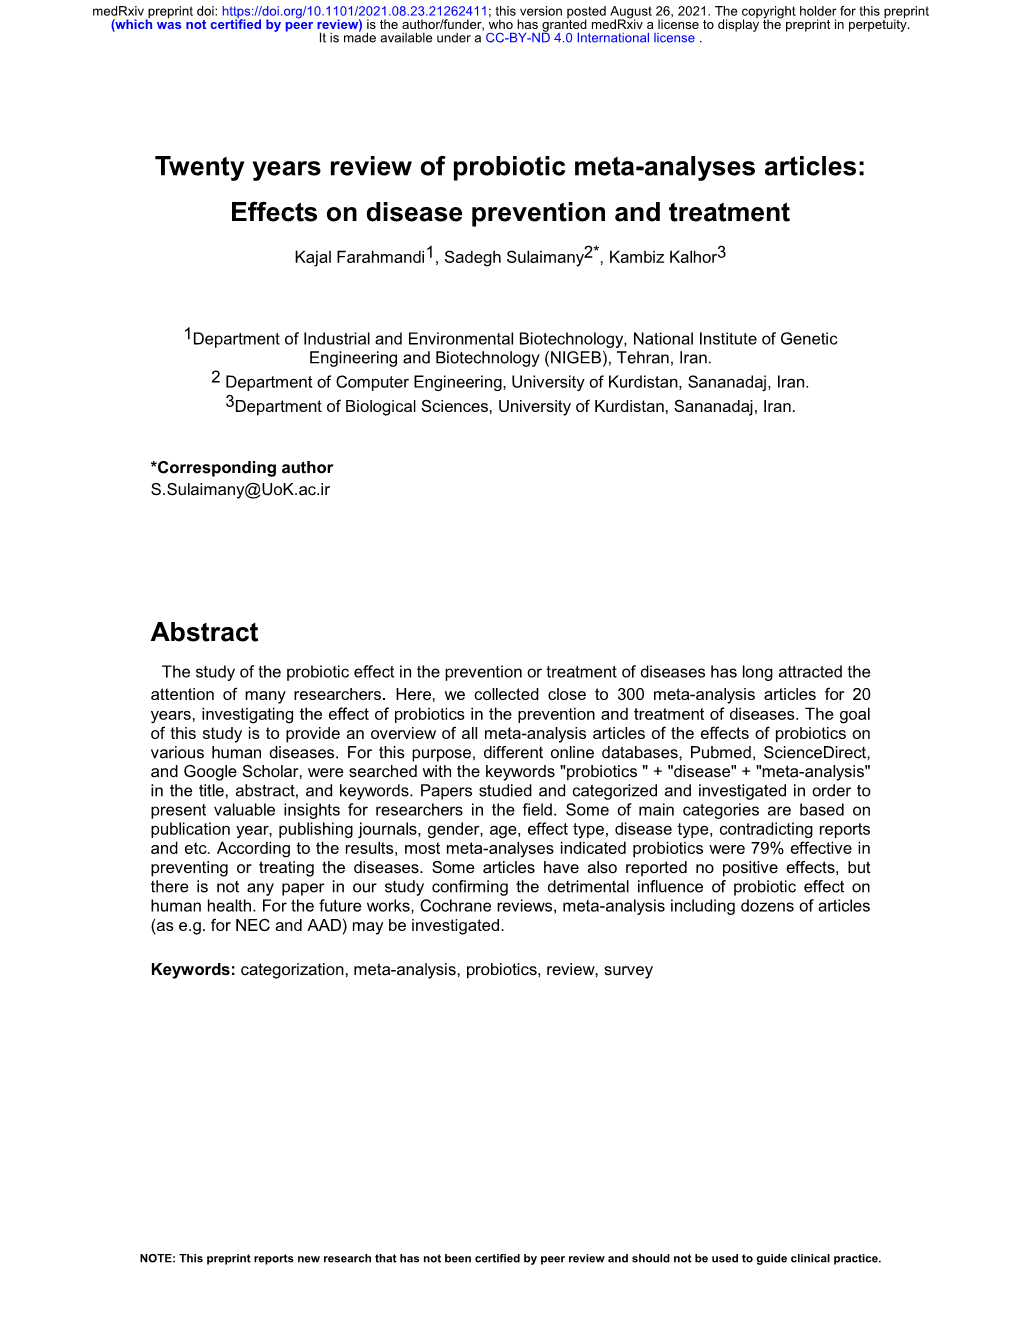 Twenty Years Review of Probiotic Meta-Analyses Articles: Effects on Disease Prevention and Treatment